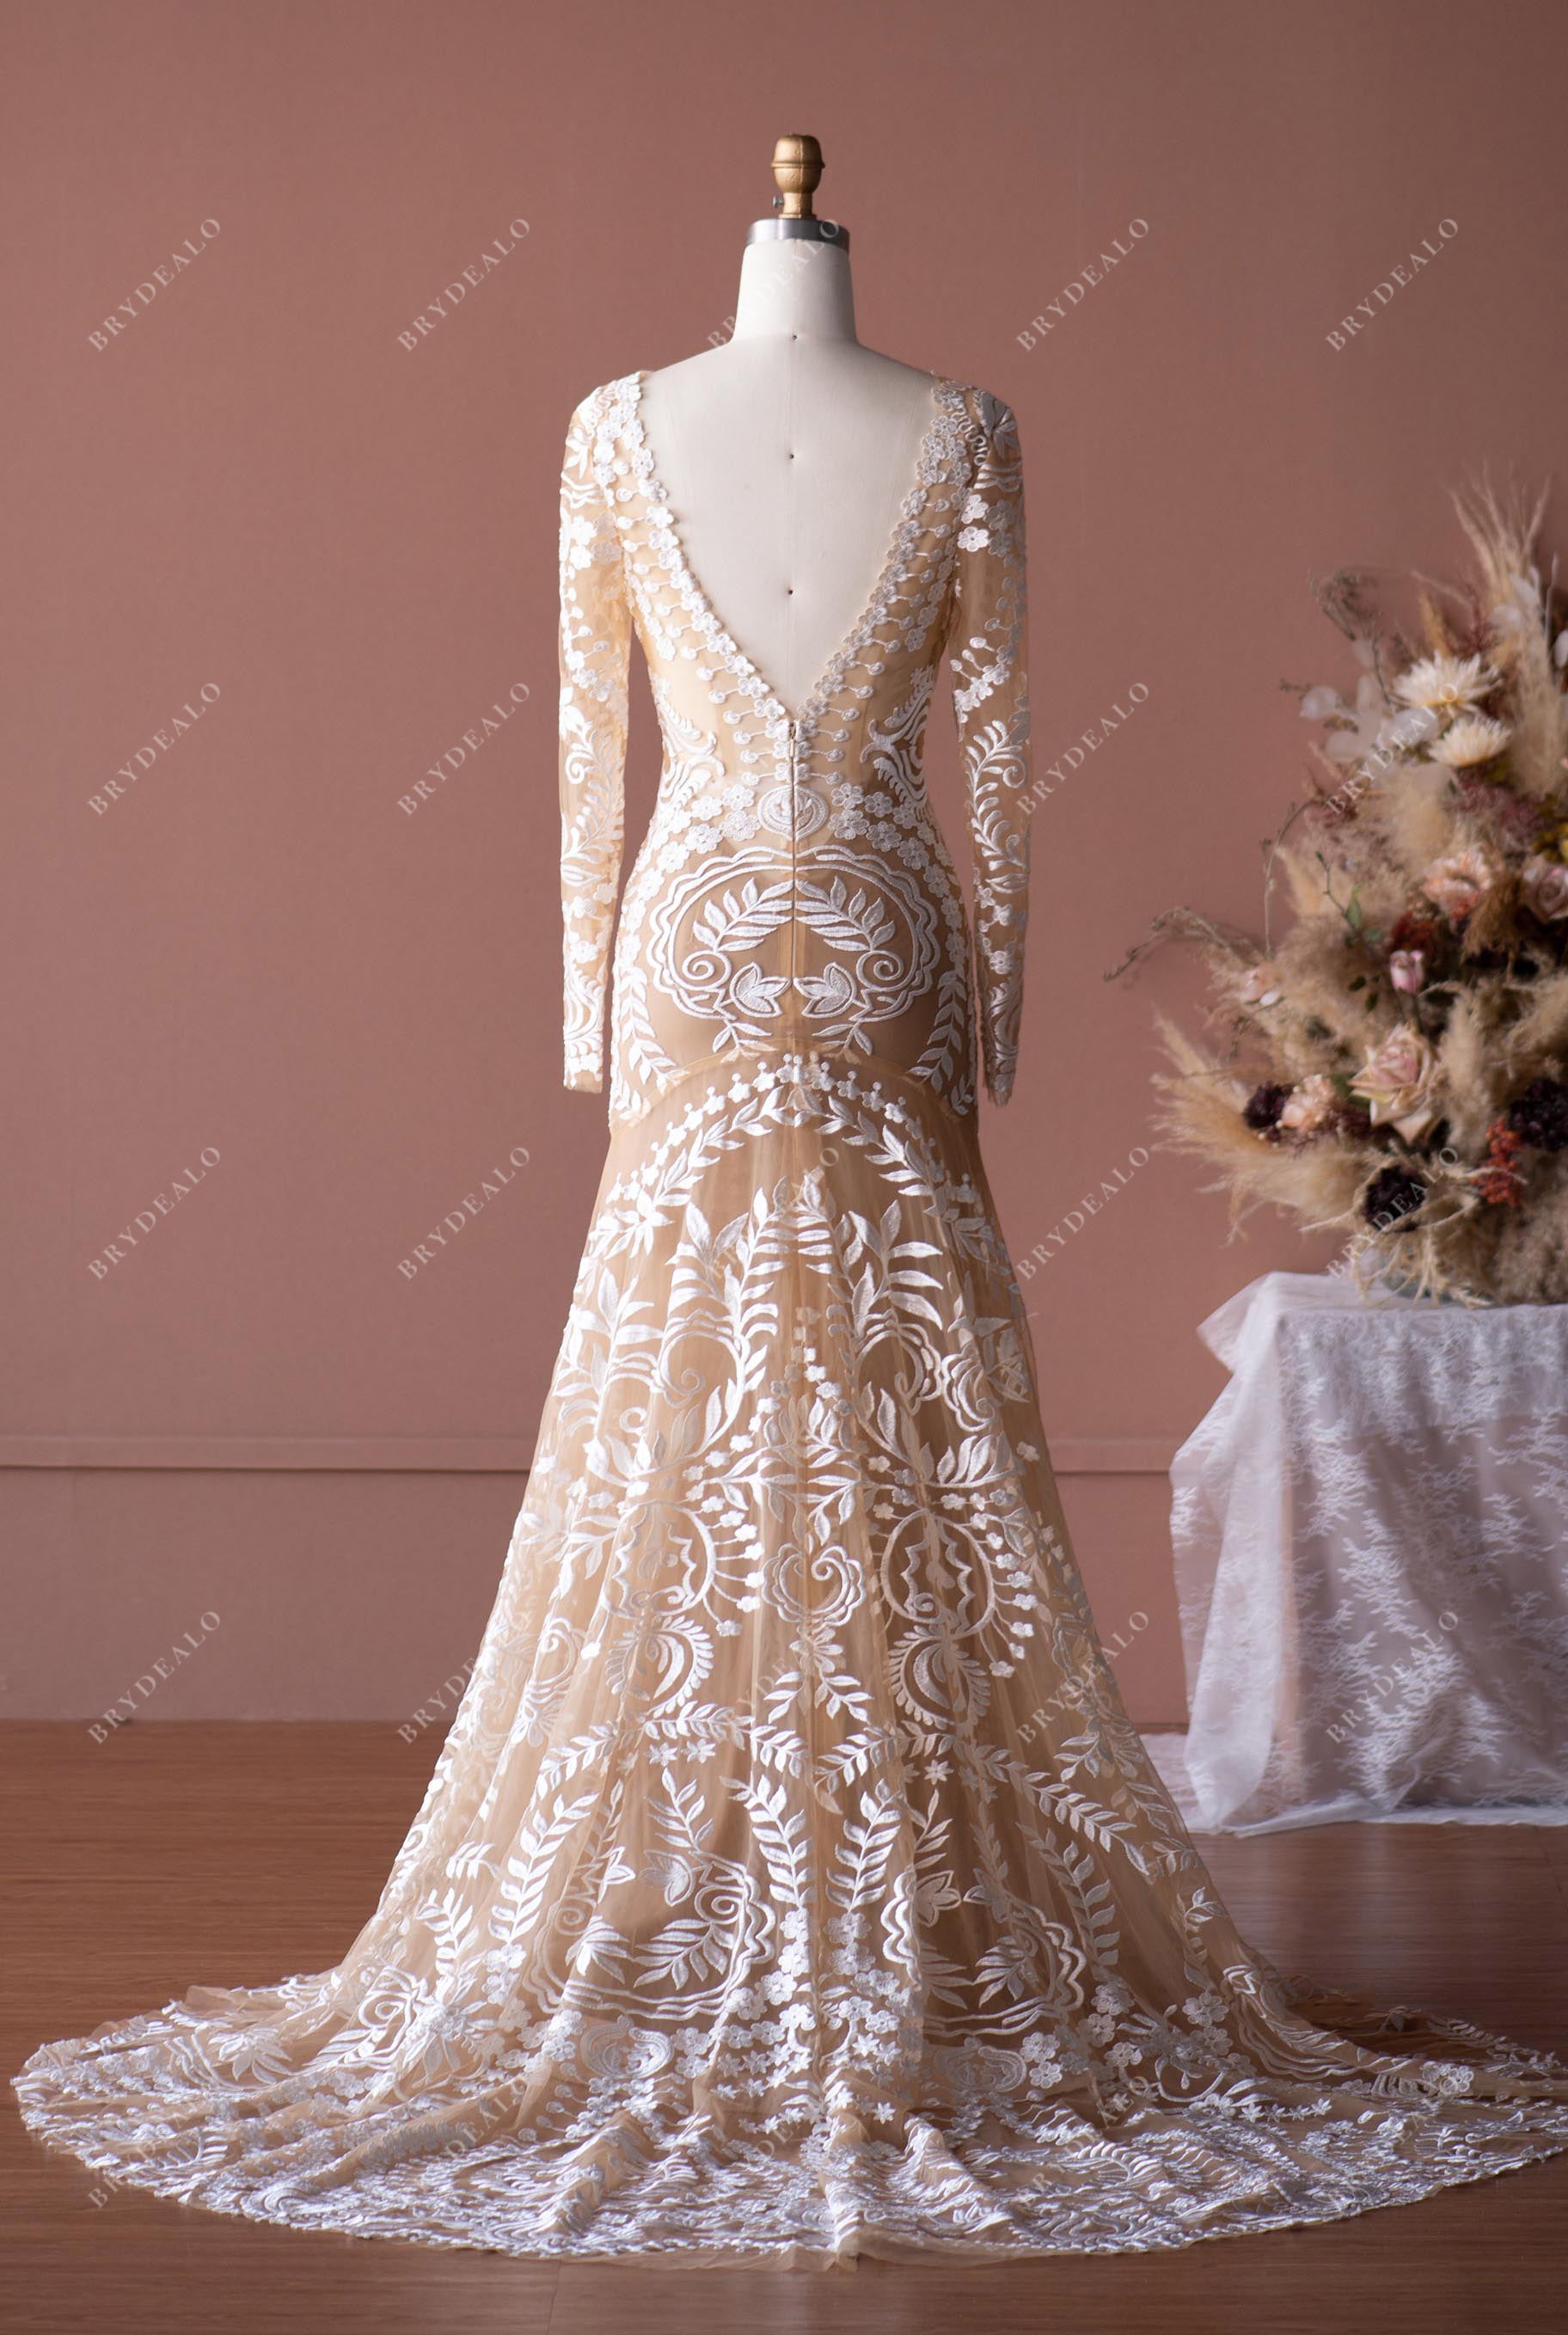 Sleeved Lace Wedding Dress with Slip